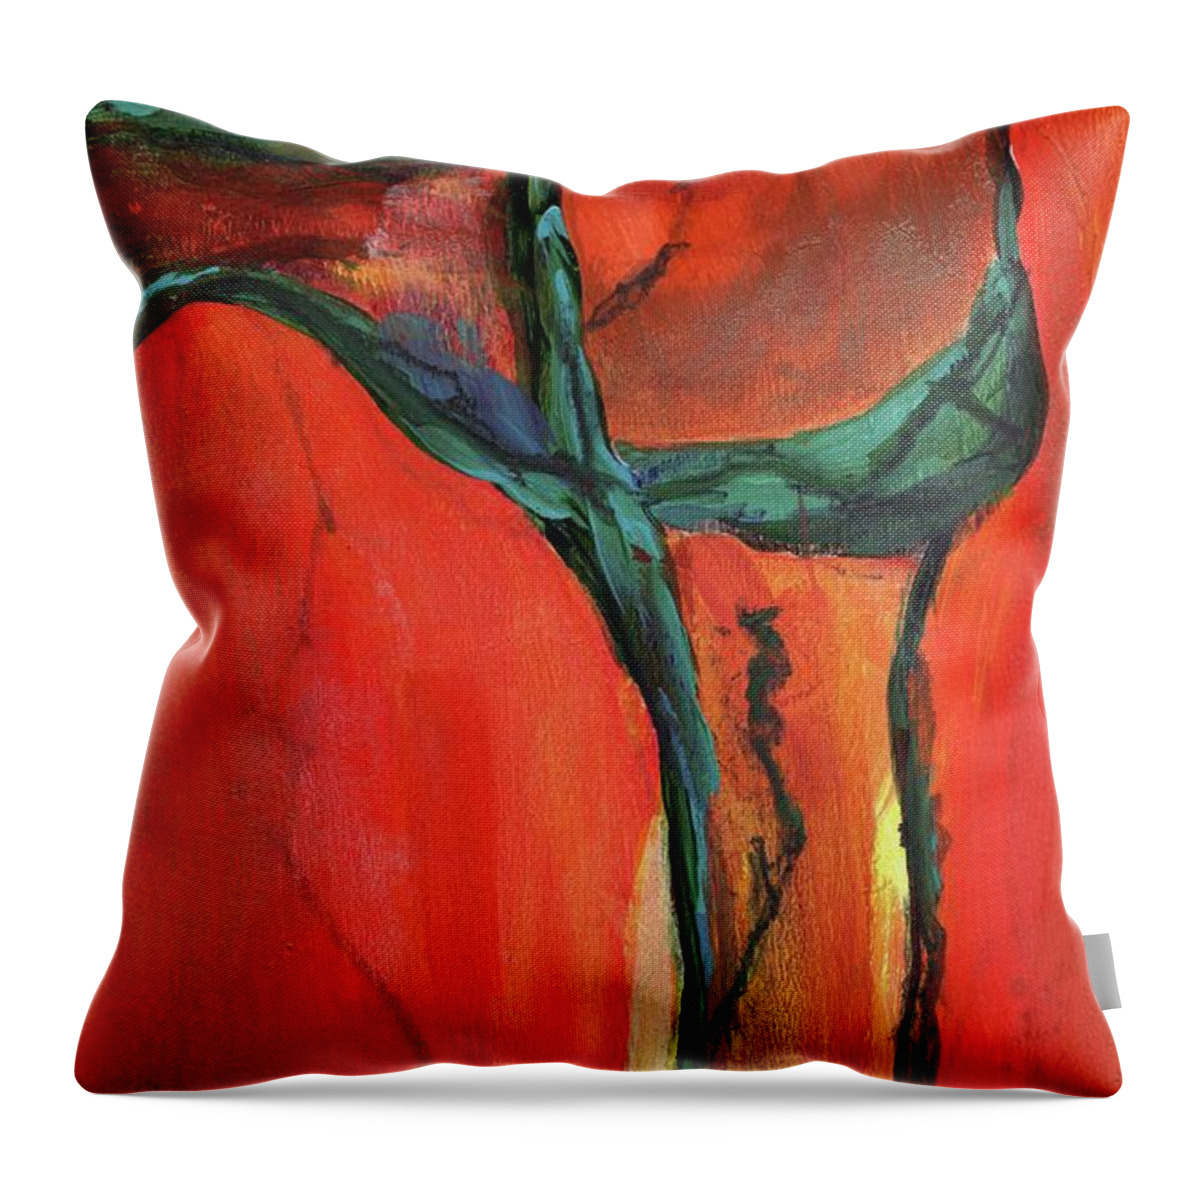 Abstract Throw Pillow featuring the painting The Cross by Diane Maley